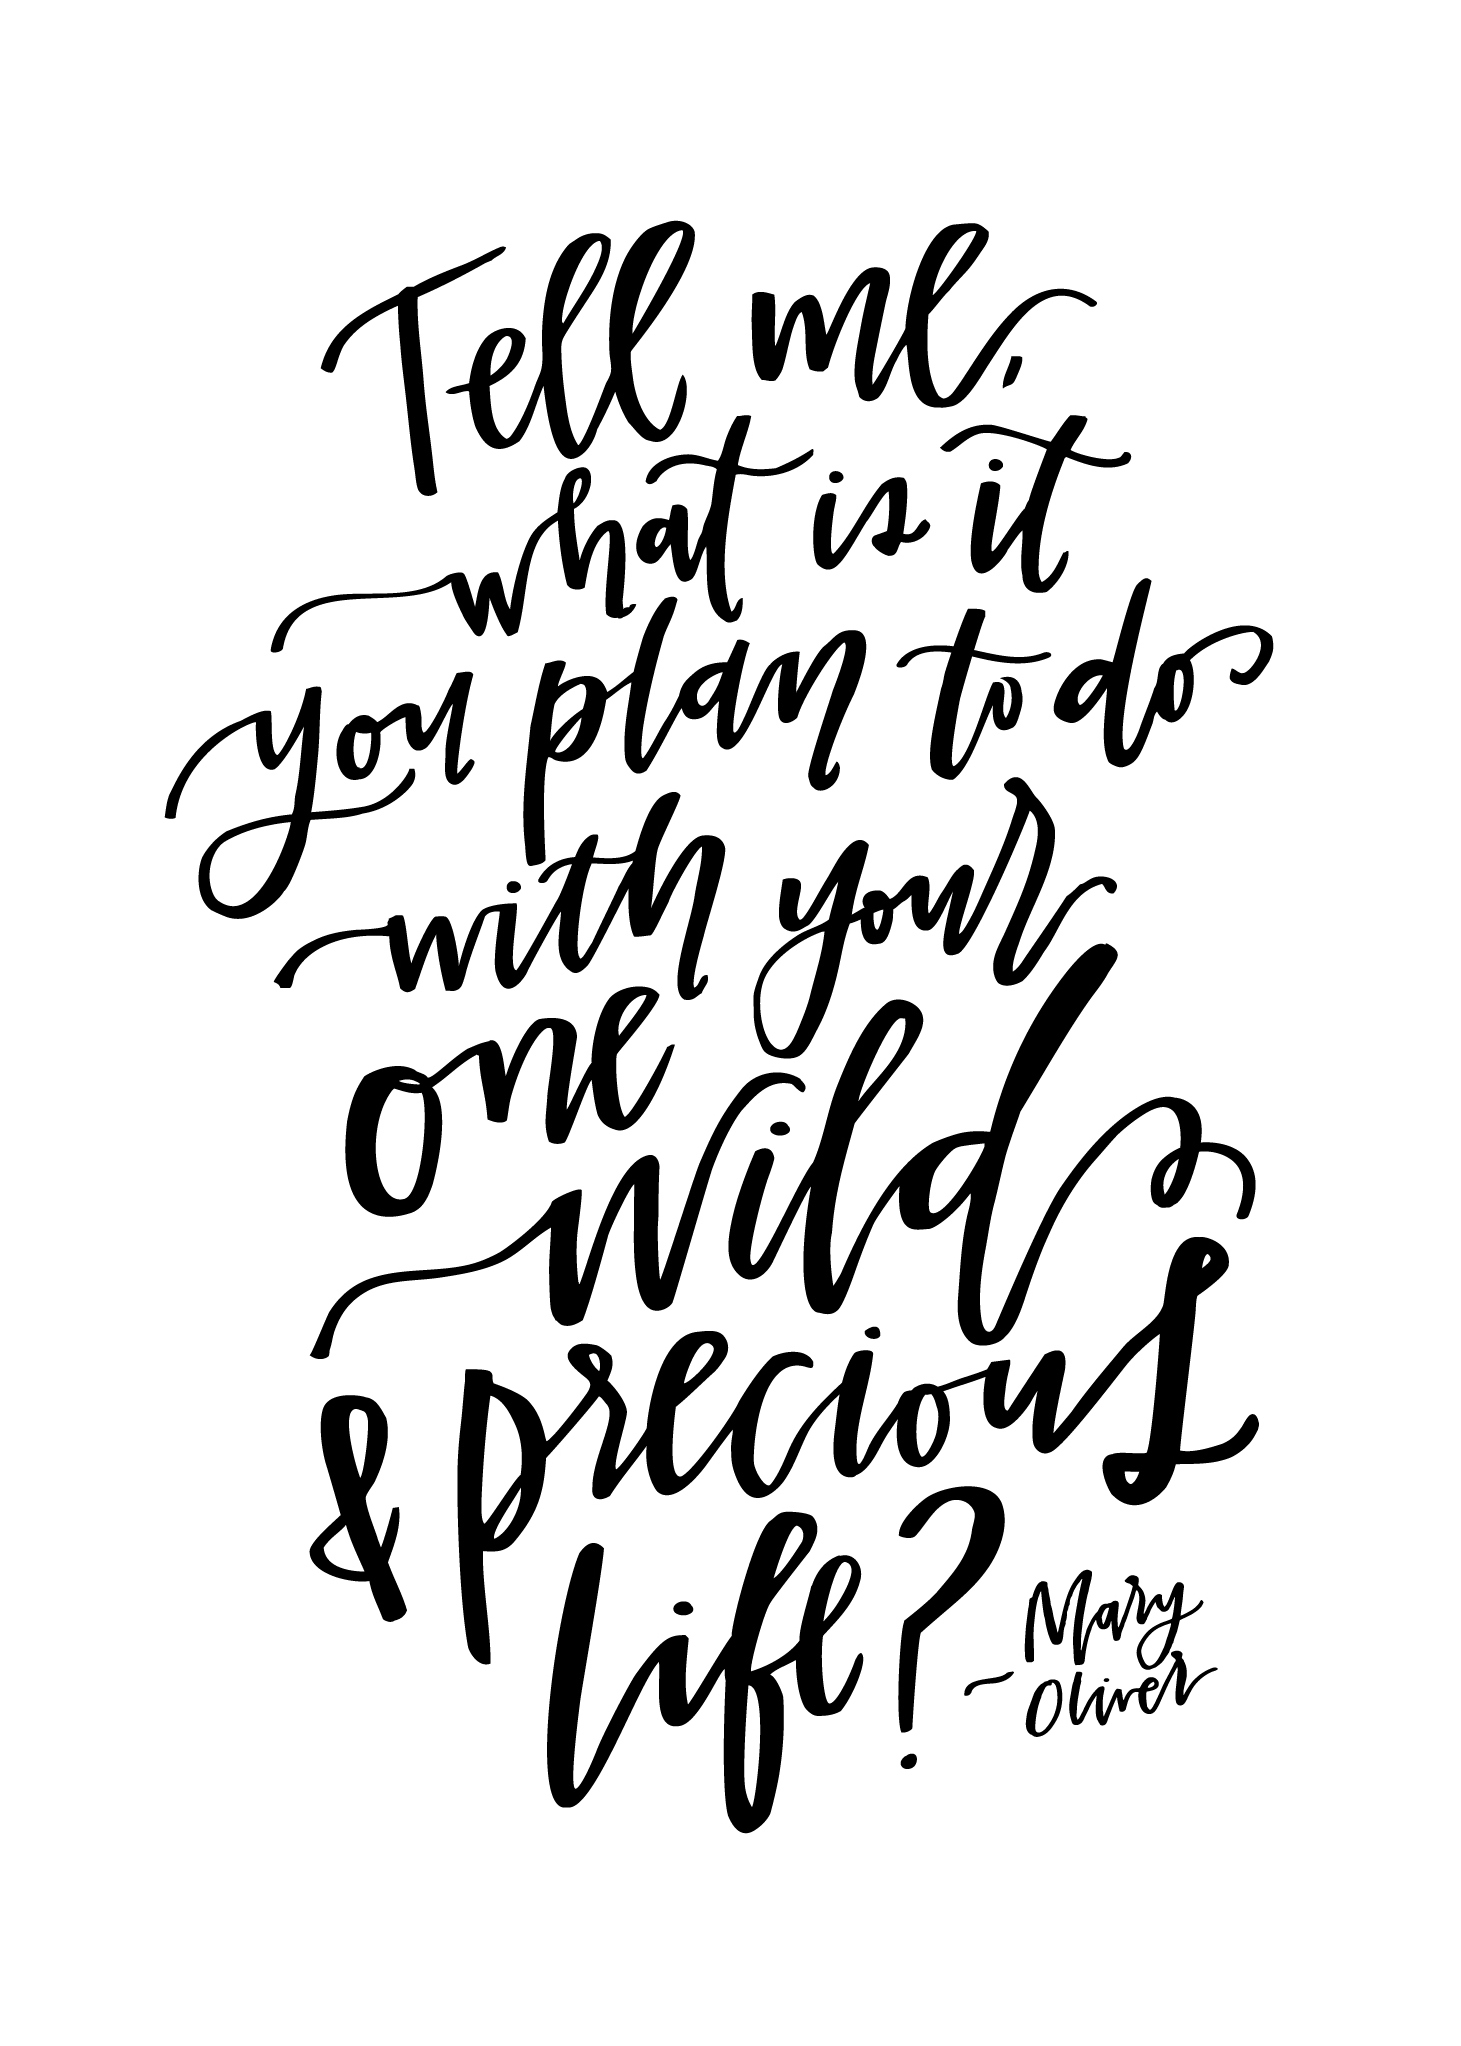 http://www.thetomkatstudio.com/wp-content/uploads/2017/06/5x7-Wild-Precious-Life-Quote-by-Lettered-Life-1.jpg